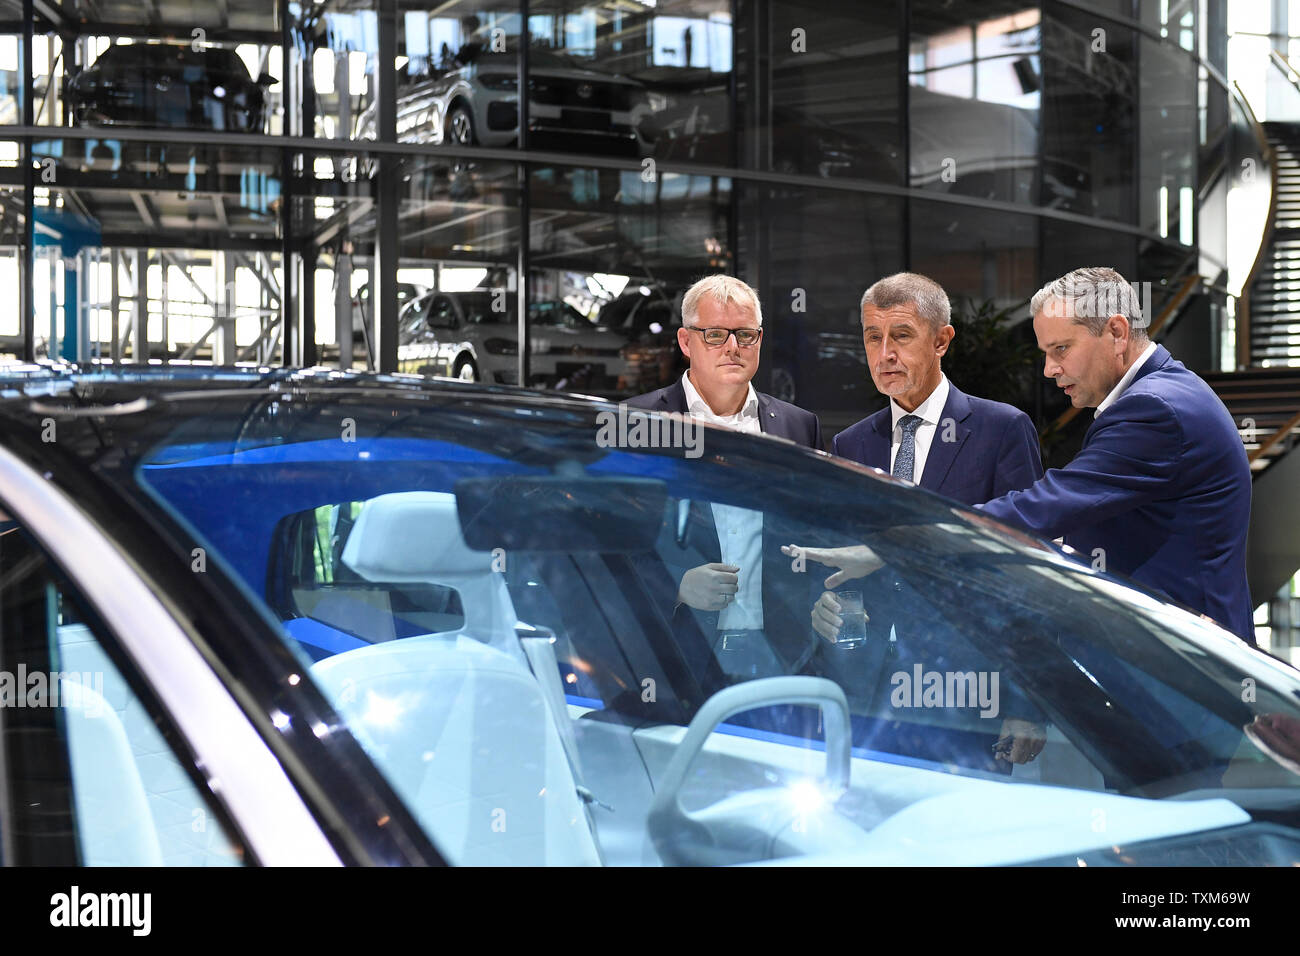 Czech Prime Minister Andrej Babis, center, visits a Volkswagen plant in Dresden, Germany, on June 25, 2019. On the photo is seen a Showcard ID concept, and company representative Kai Siedlatzek, left, and Director of the plant Lars Dittert, right. (CTK Photo/Ondrej Deml) Stock Photo